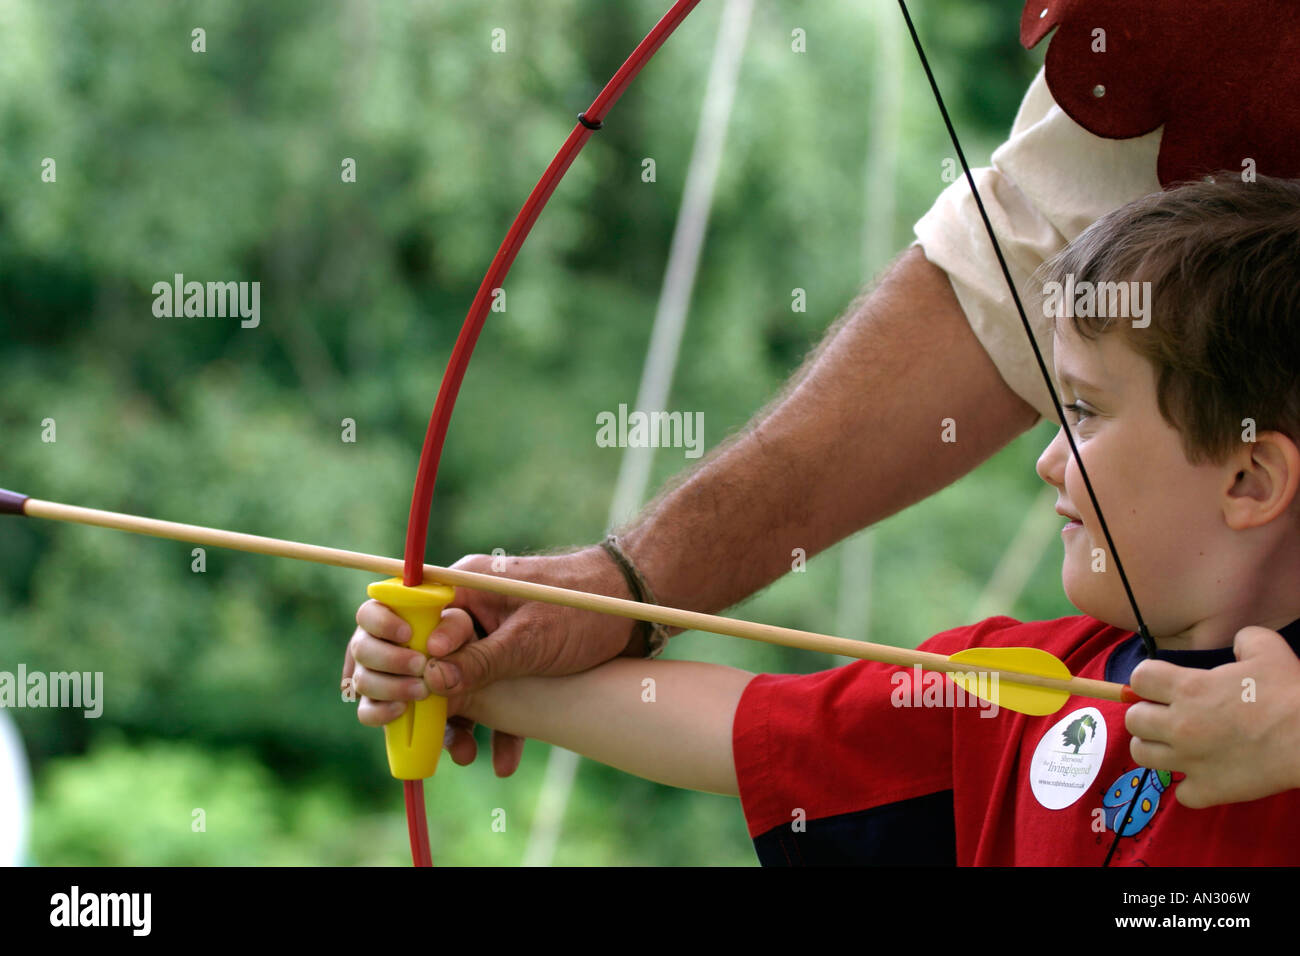 six-year old Lewis tries his hand at archery Stock Photo